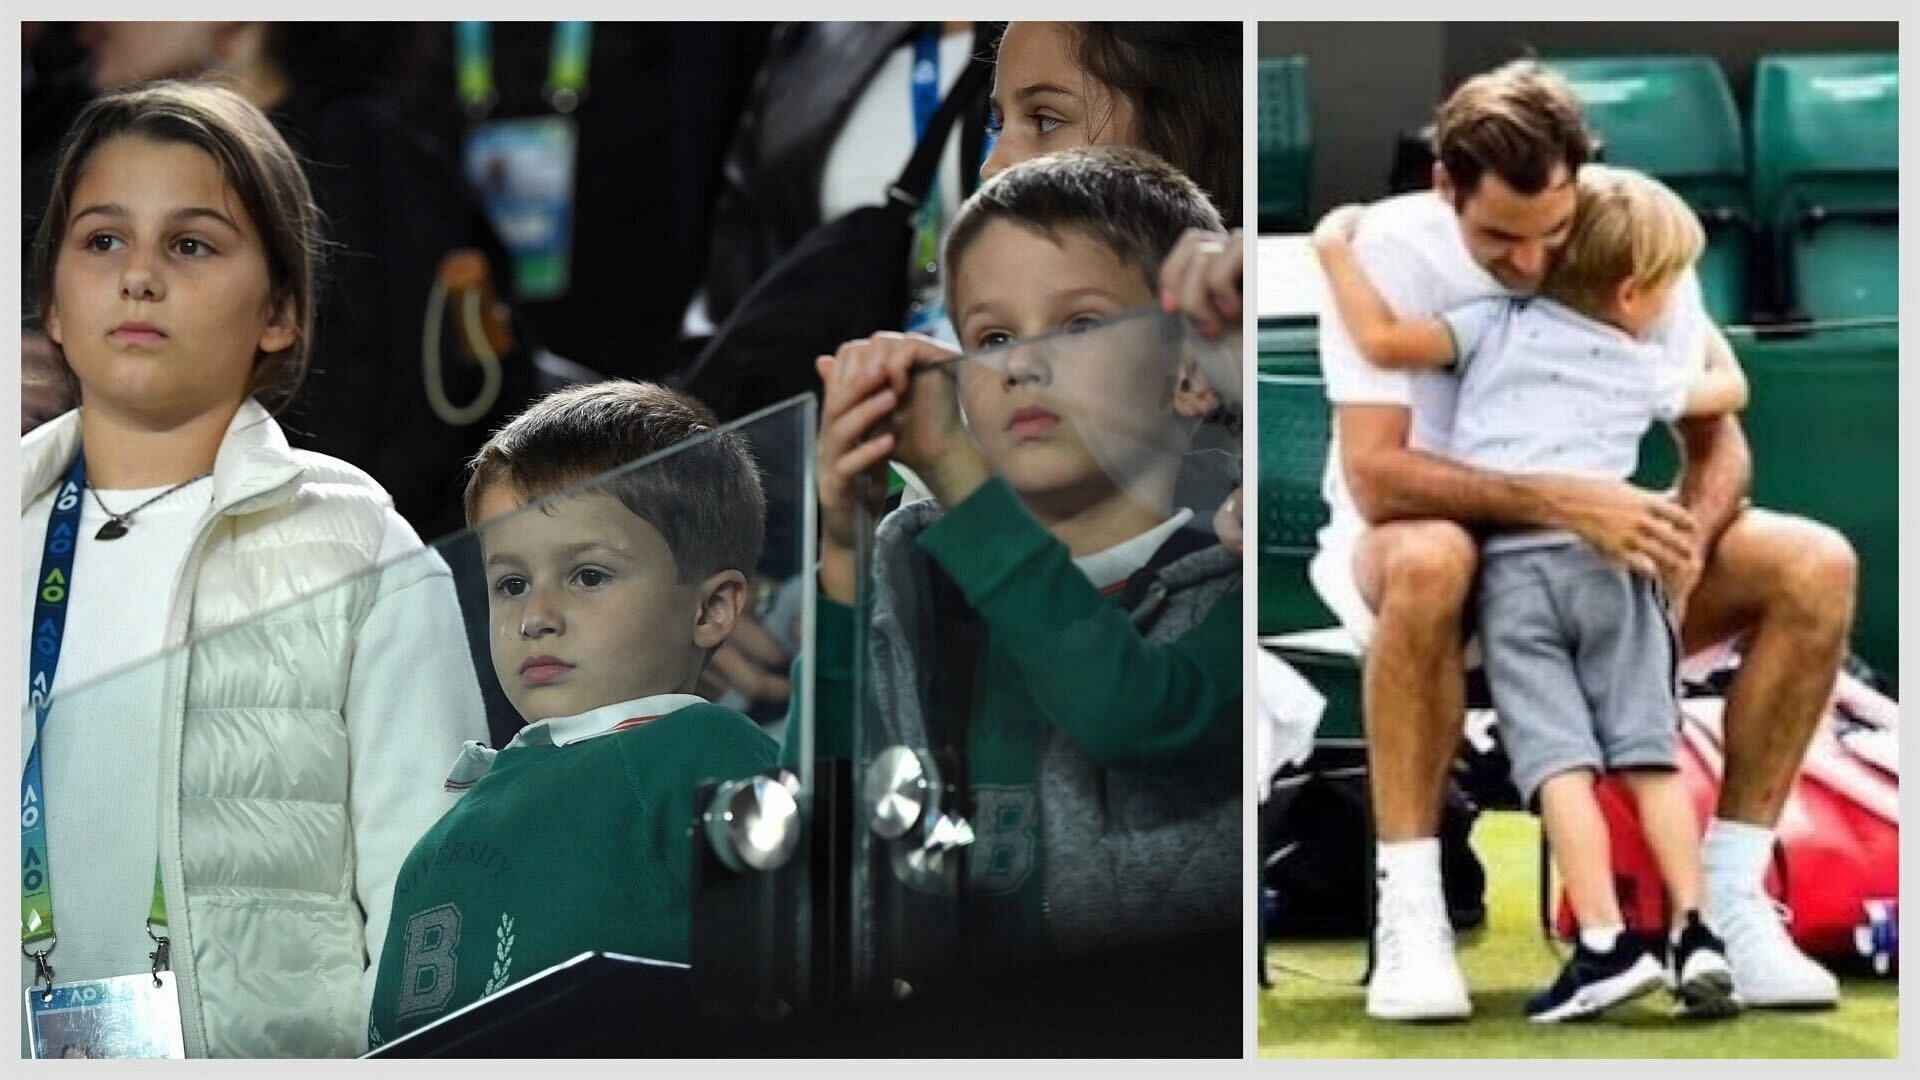 Roger Federer revealed that e still plays tennis with his children